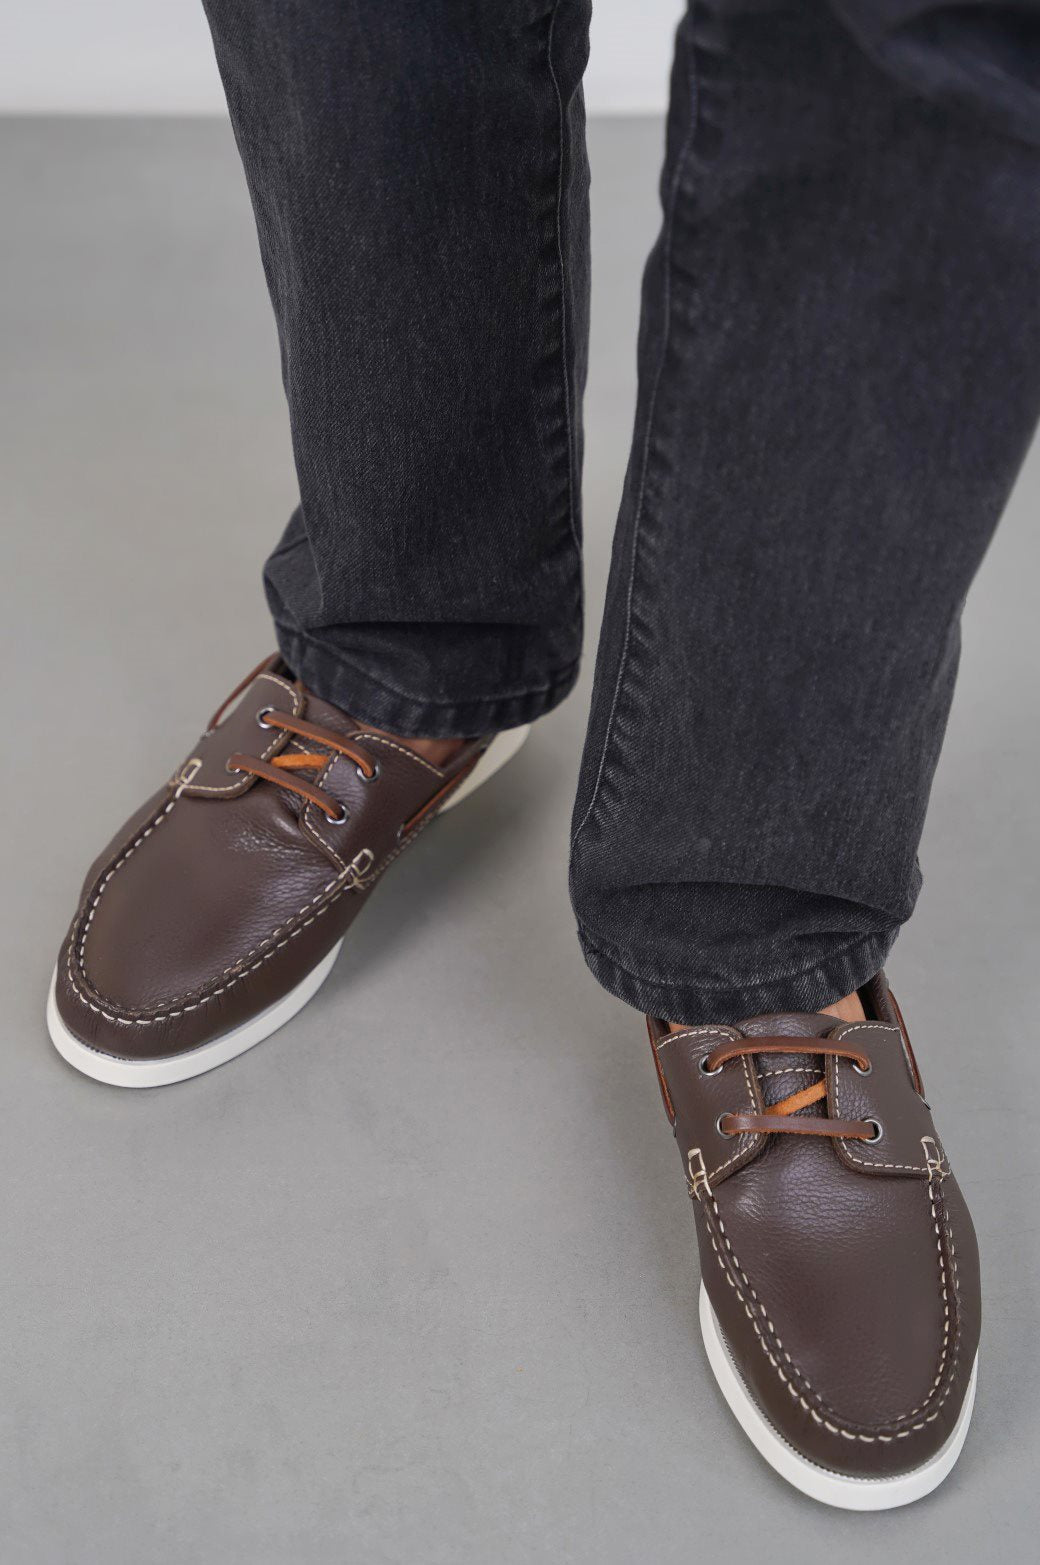 DARK BROWN CLASSIC BOAT SHOES